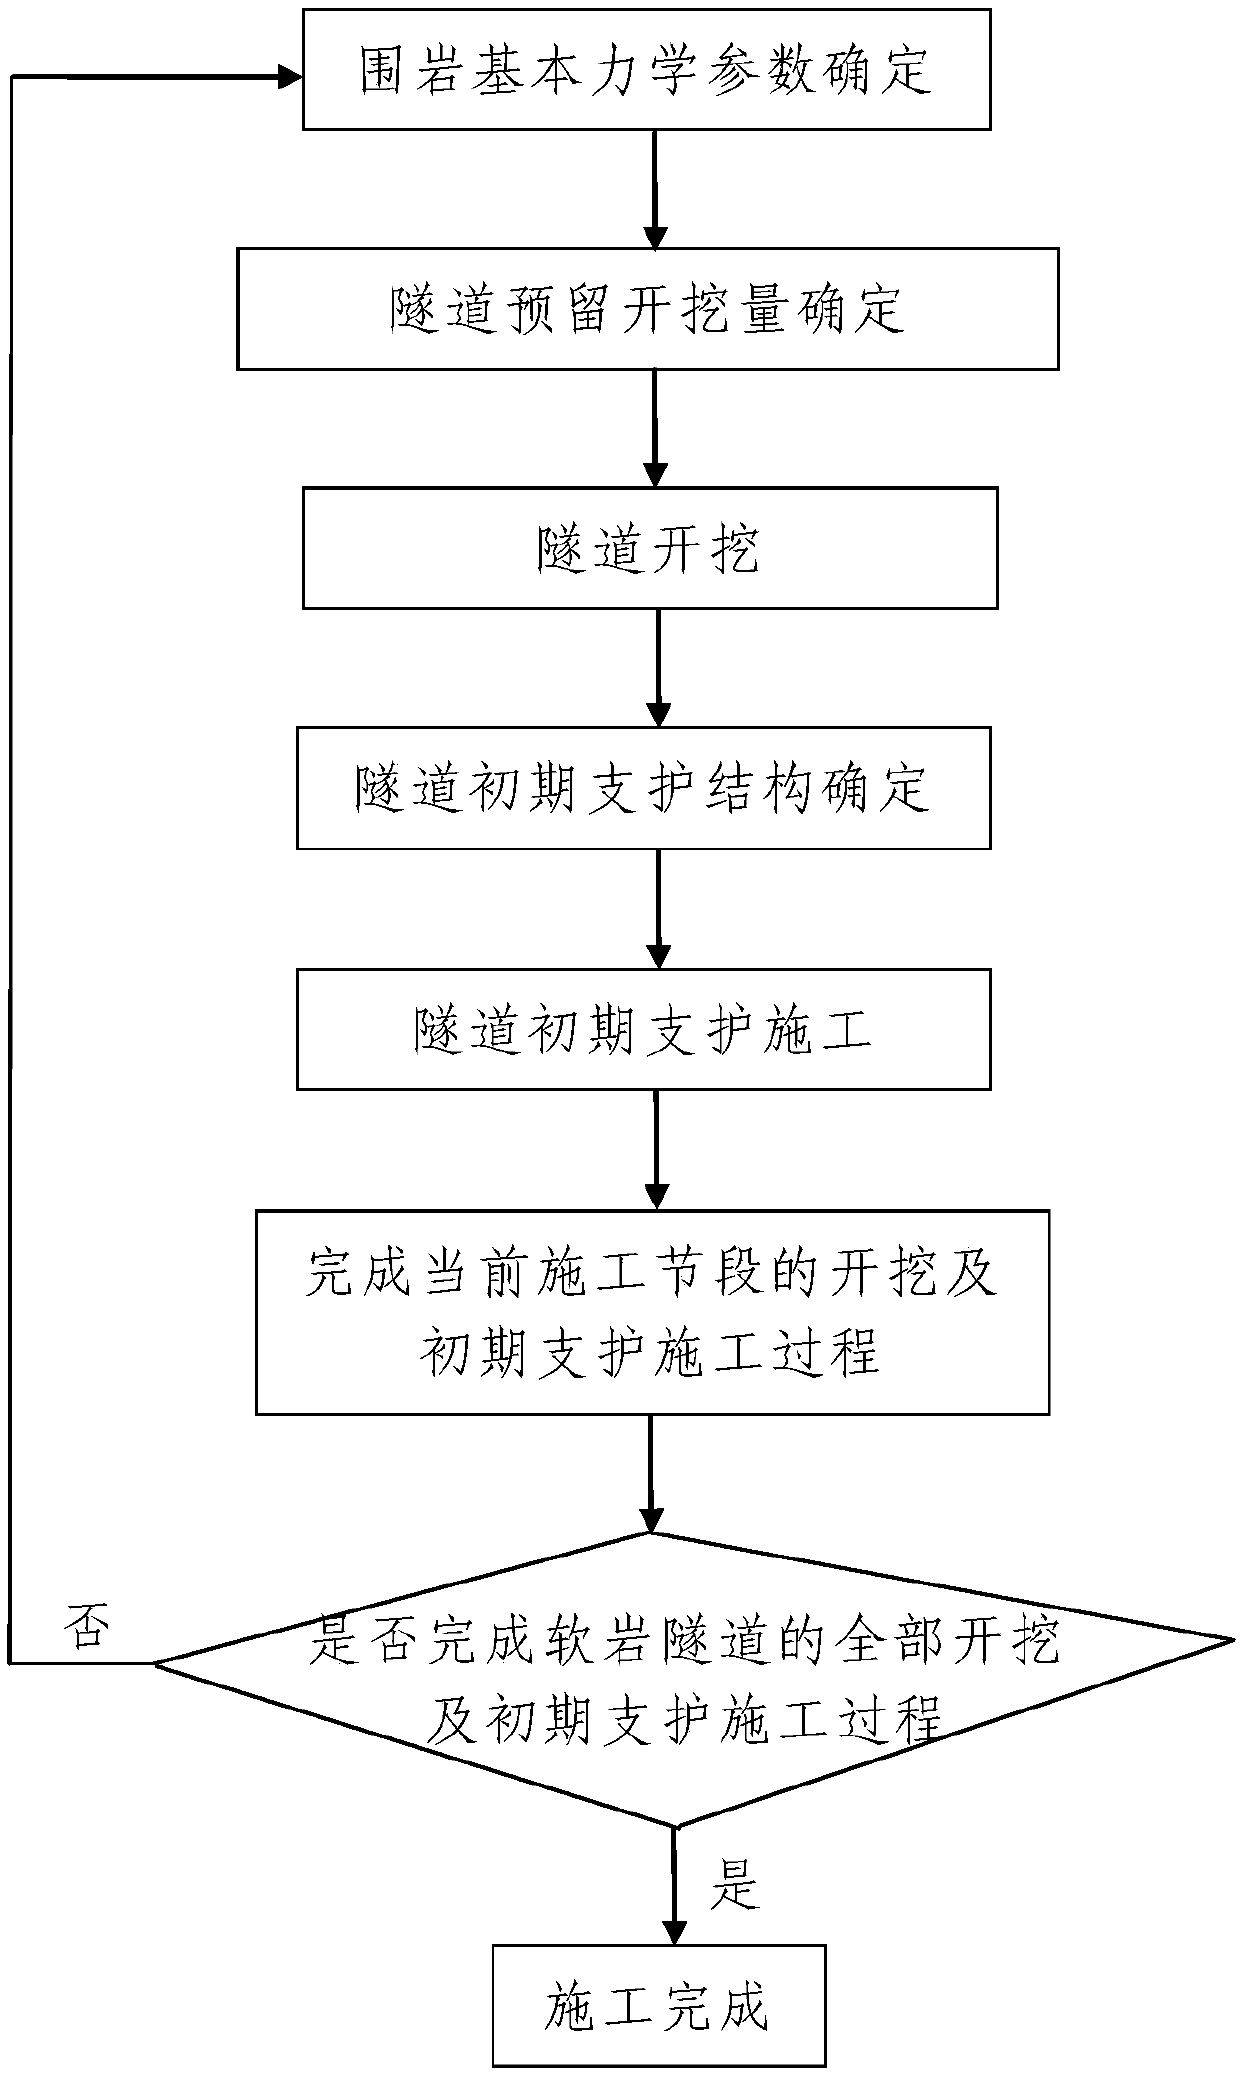 A soft rock tunnel excavation and primary support method